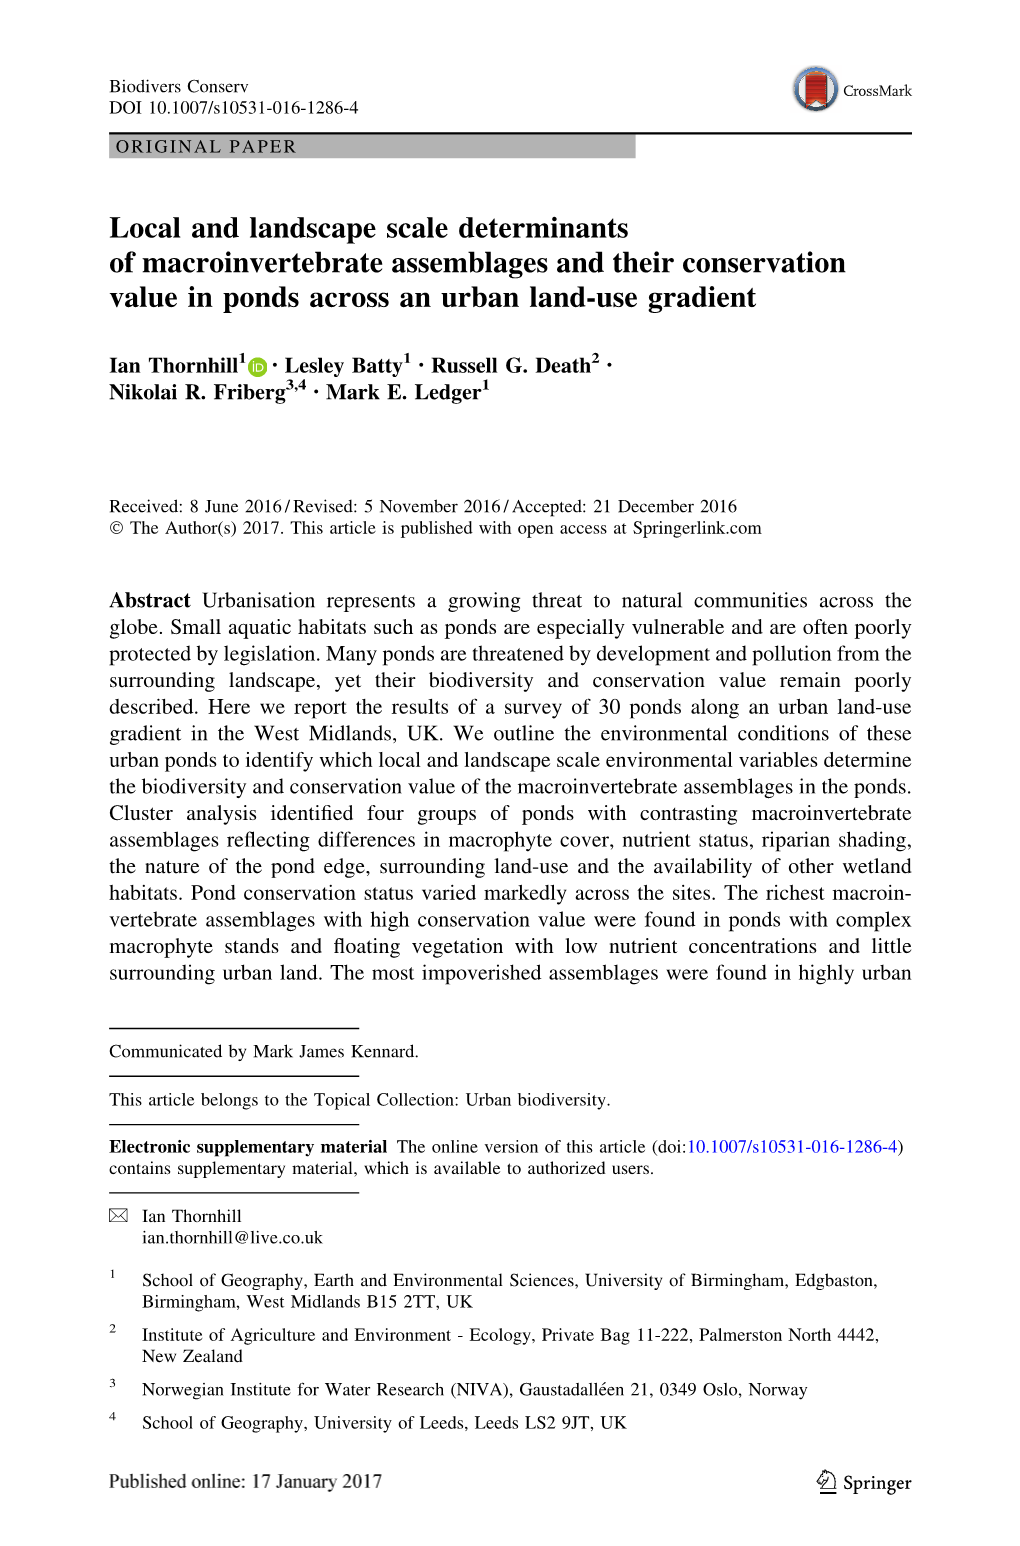 Local and Landscape Scale Determinants of Macroinvertebrate Assemblages and Their Conservation Value in Ponds Across an Urban Land-Use Gradient